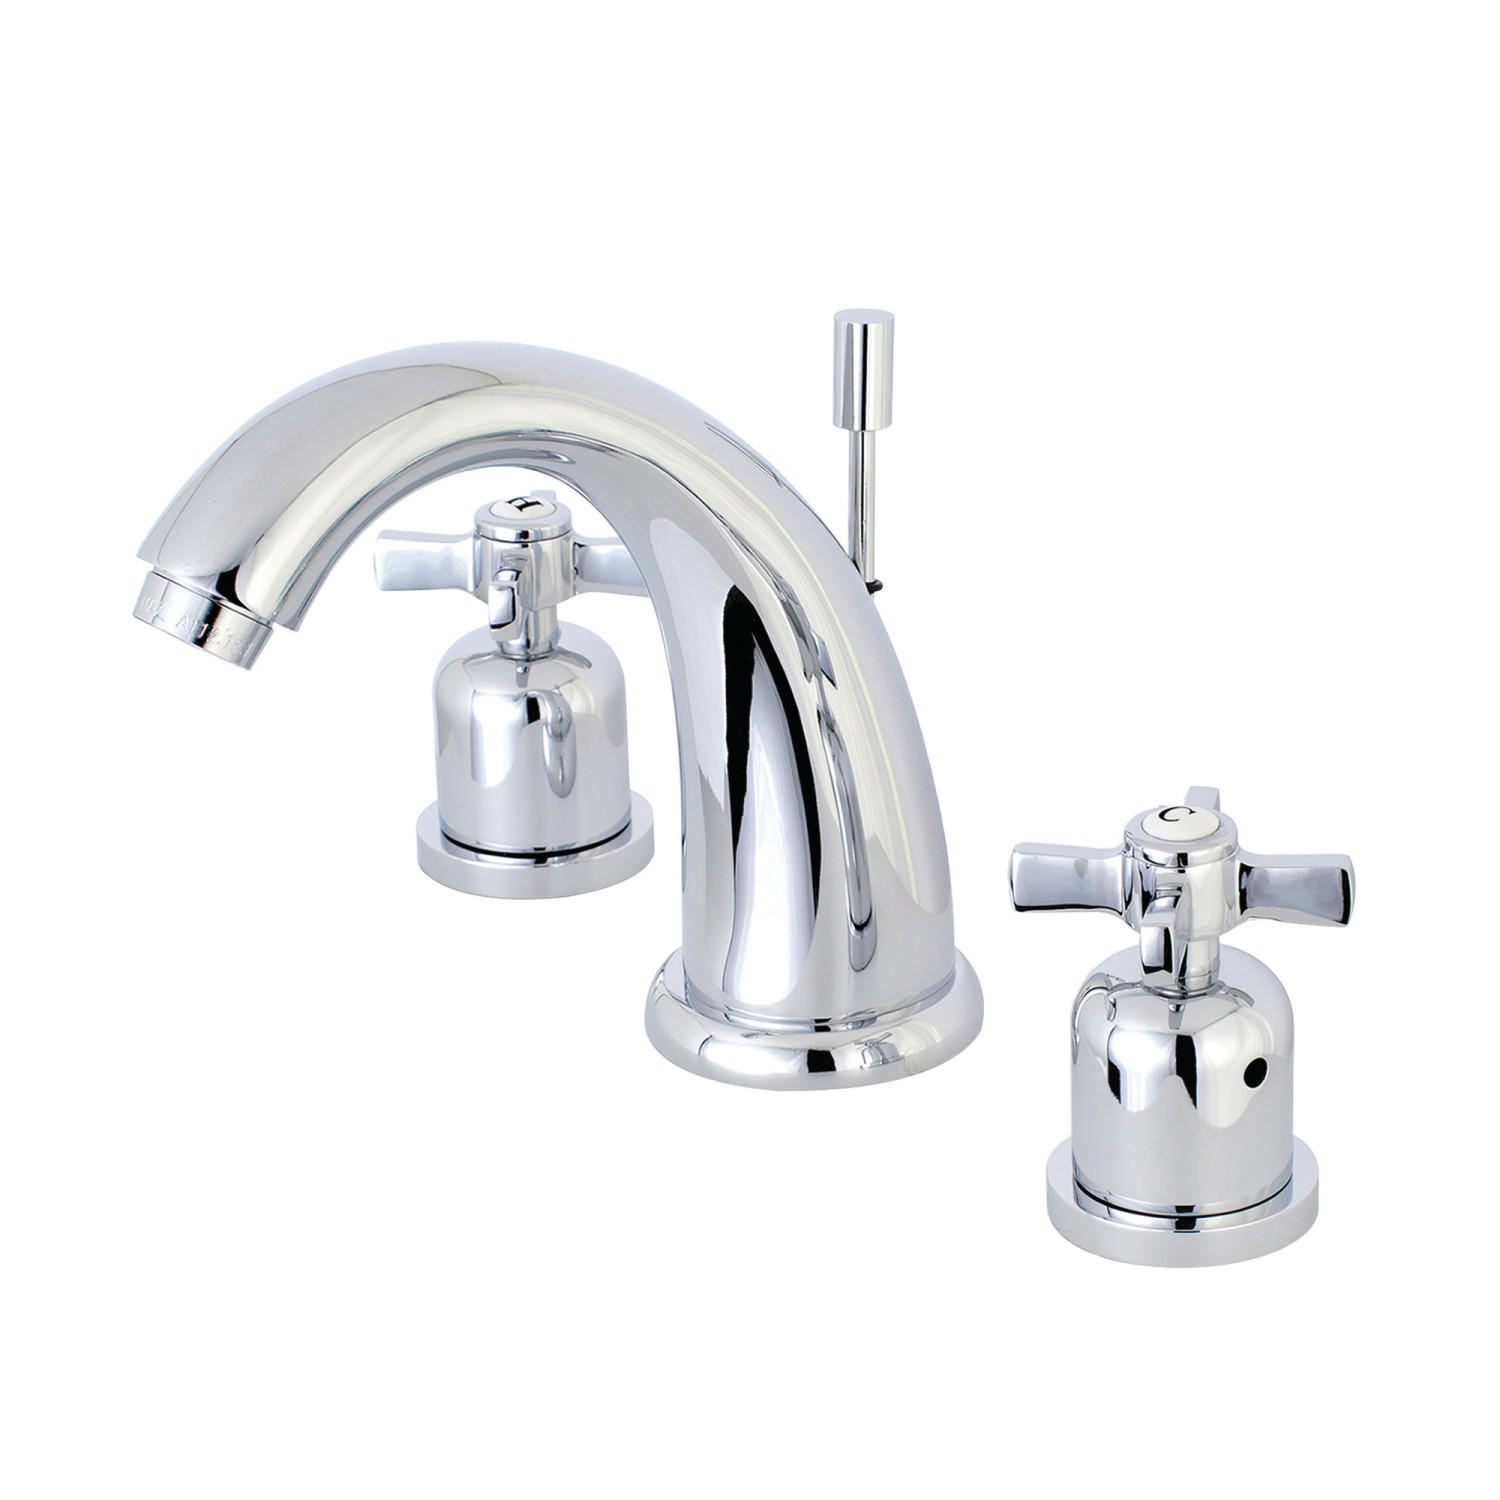 Modern 2-Handle 3-Hole Deck Mounted Widespread Bathroom Faucet with Plastic Pop-Up in Polished Chrome Finish